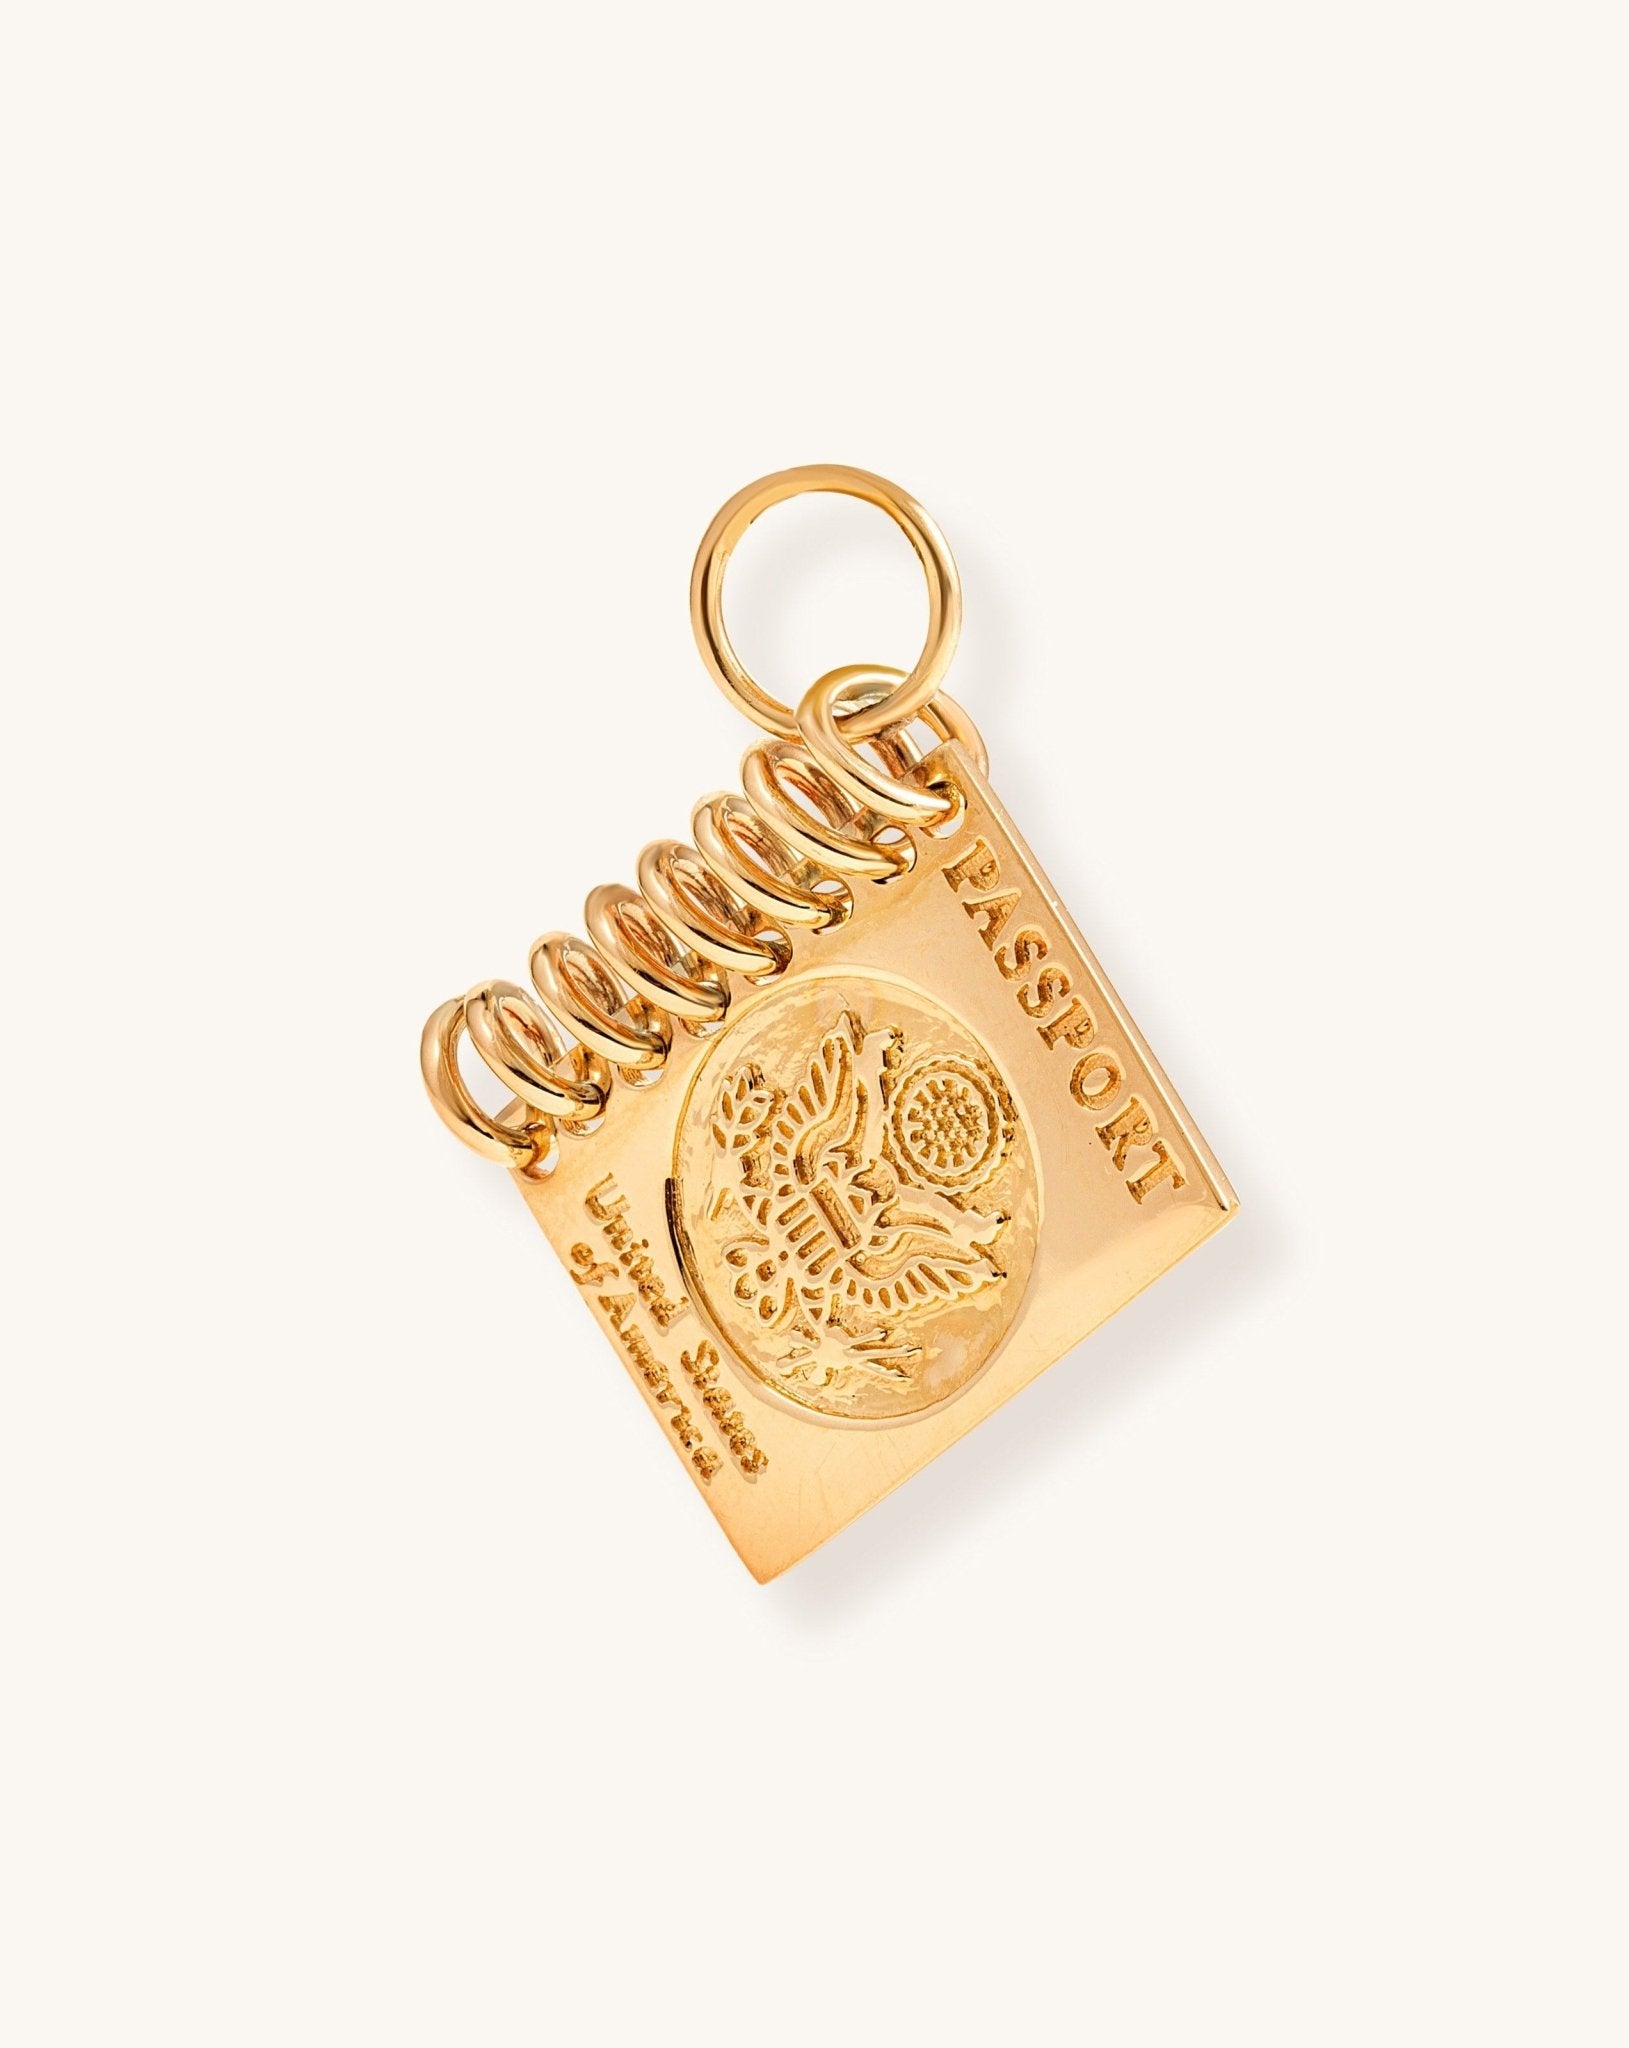 Solid Gold USA Passport Necklace Charm - Sparkle Society